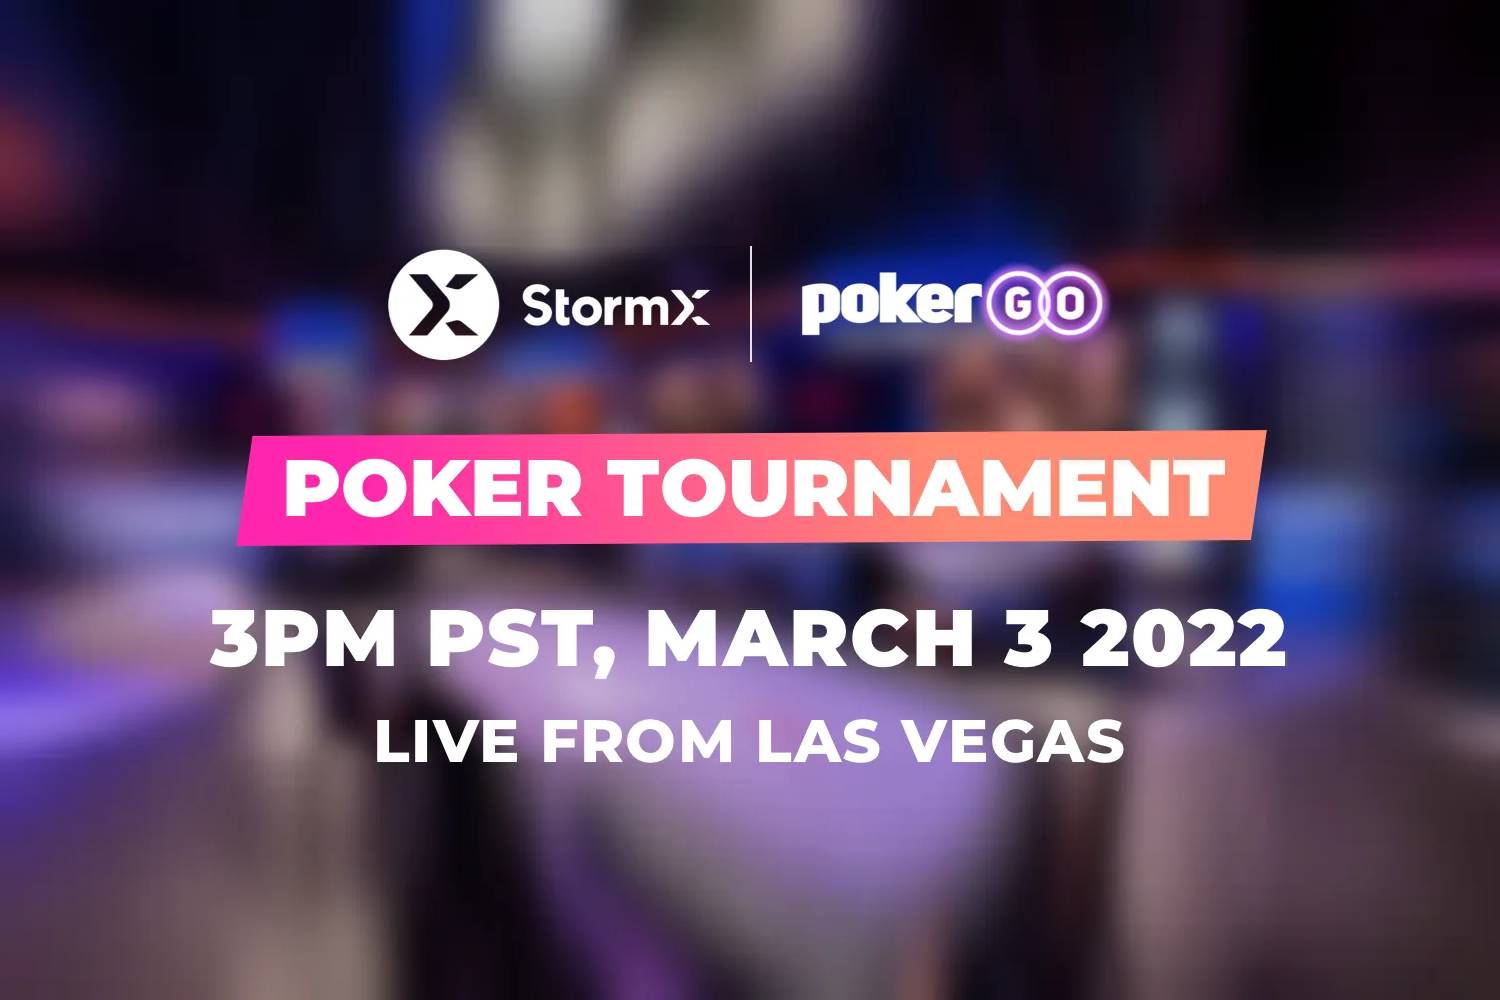 Learn All About the StormX Invitational Poker Tournament and How to Win Free Money!